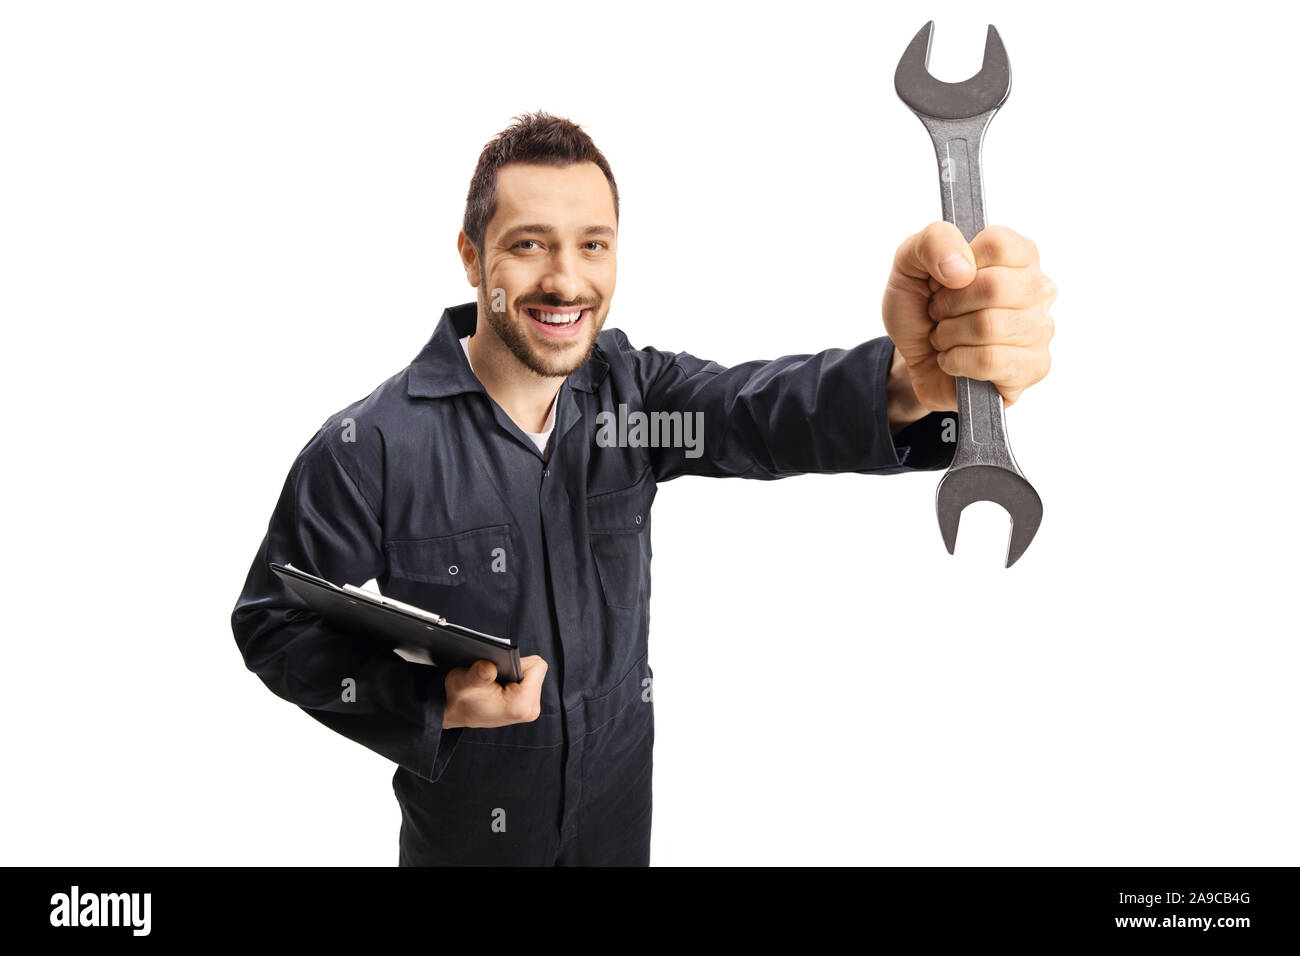 Auto mechanic holding a wrench and a clipboard and smiling at the camera isolated on white background Stock Photo